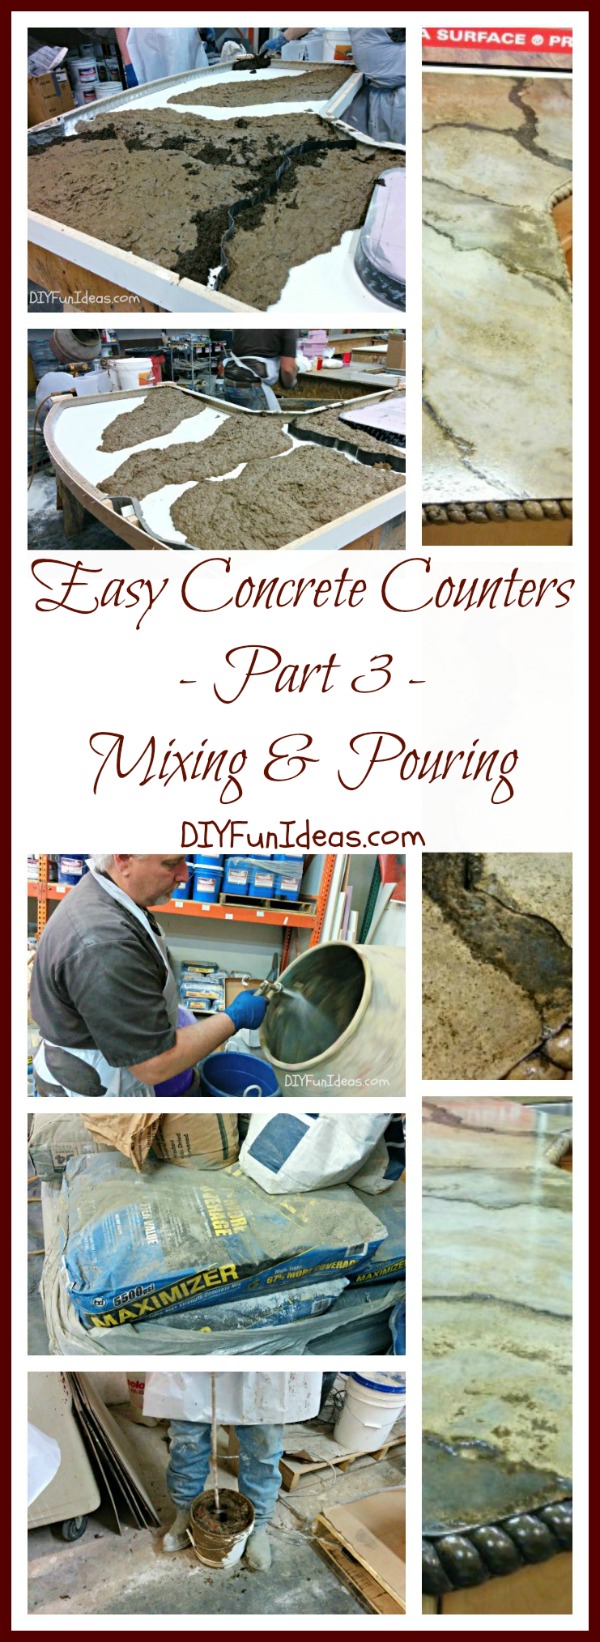 EASY TUTORIAL TO CREATE AMAZING DIY CONCRETE COUNTERTOPS - Part 3: Mixing & Pouring